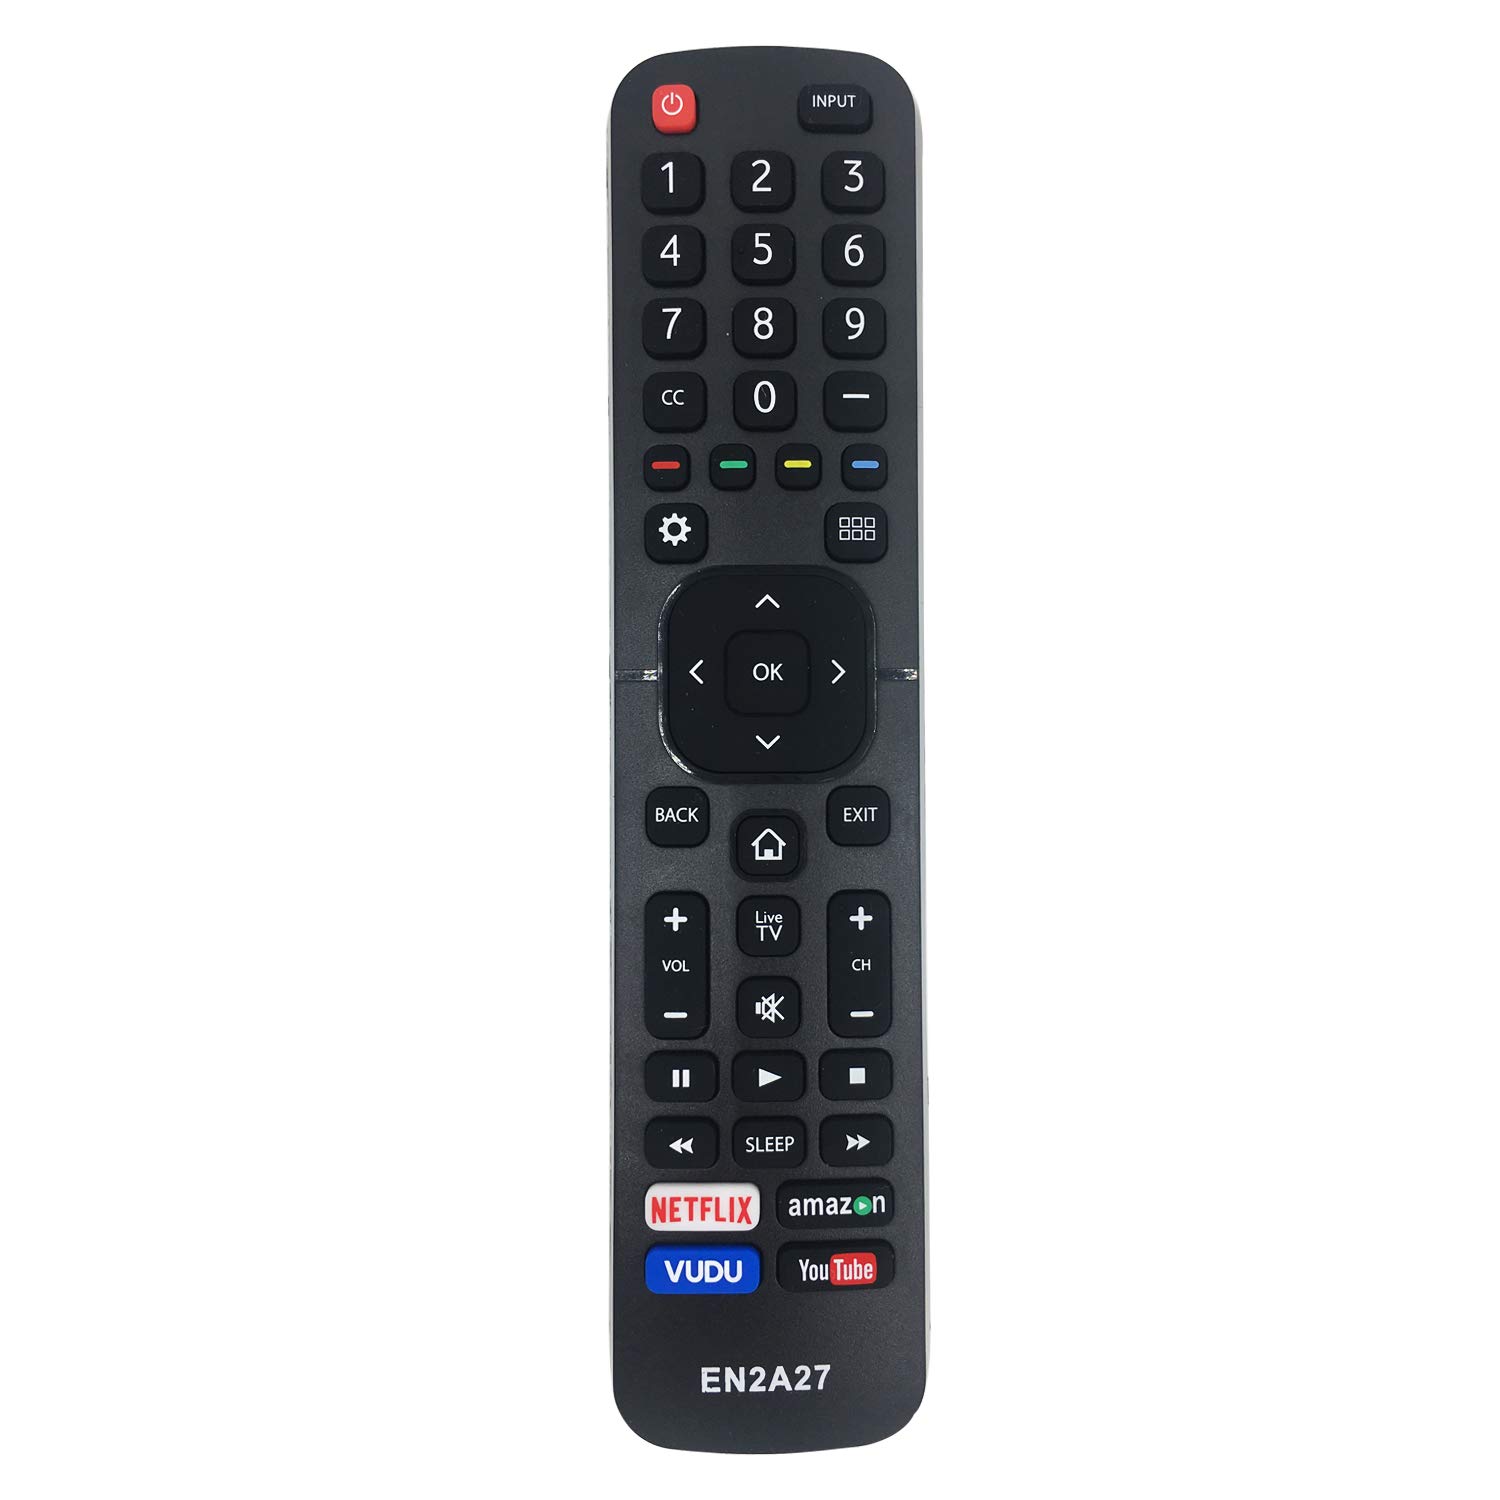 How to Fix Hisense Remote Not Working